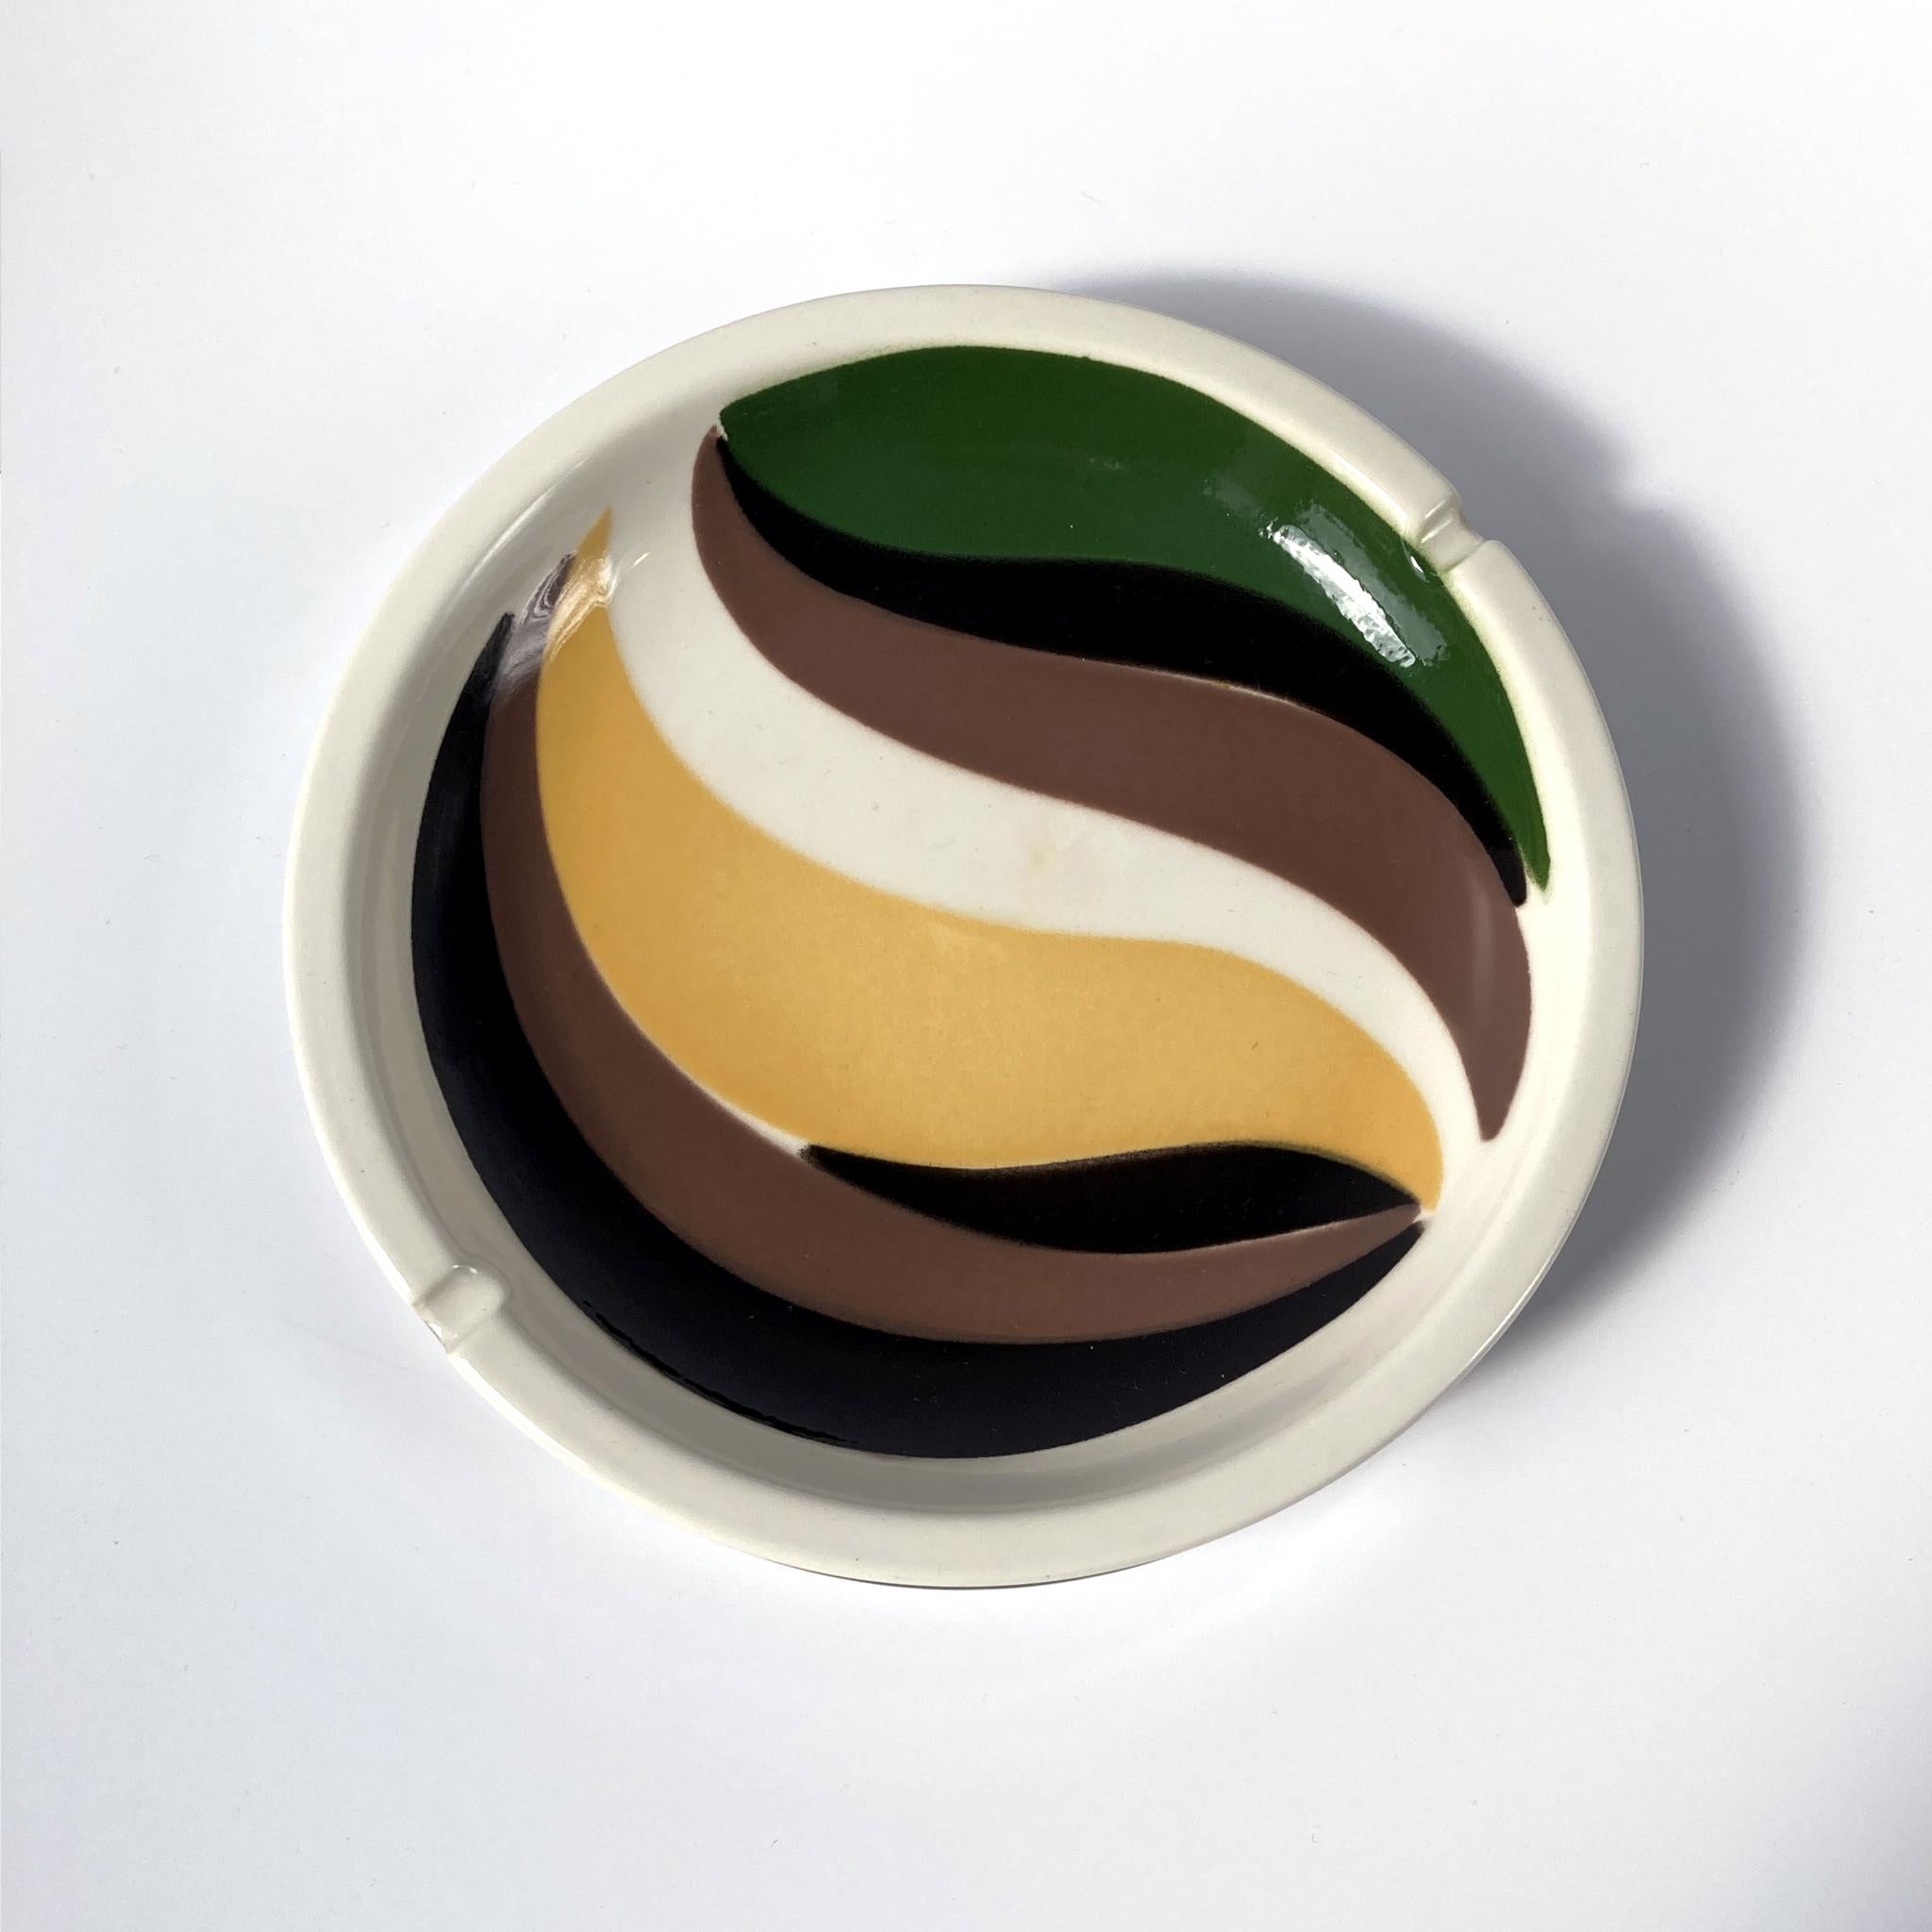 Stunning, unique Mancioli for Raymor vide poche catchall. Bold colors of green, yellow, brown and black swirl through the geometric design on this wonderful piece. The size is larger than a normal catchall, making it an eye catching piece. Perfect